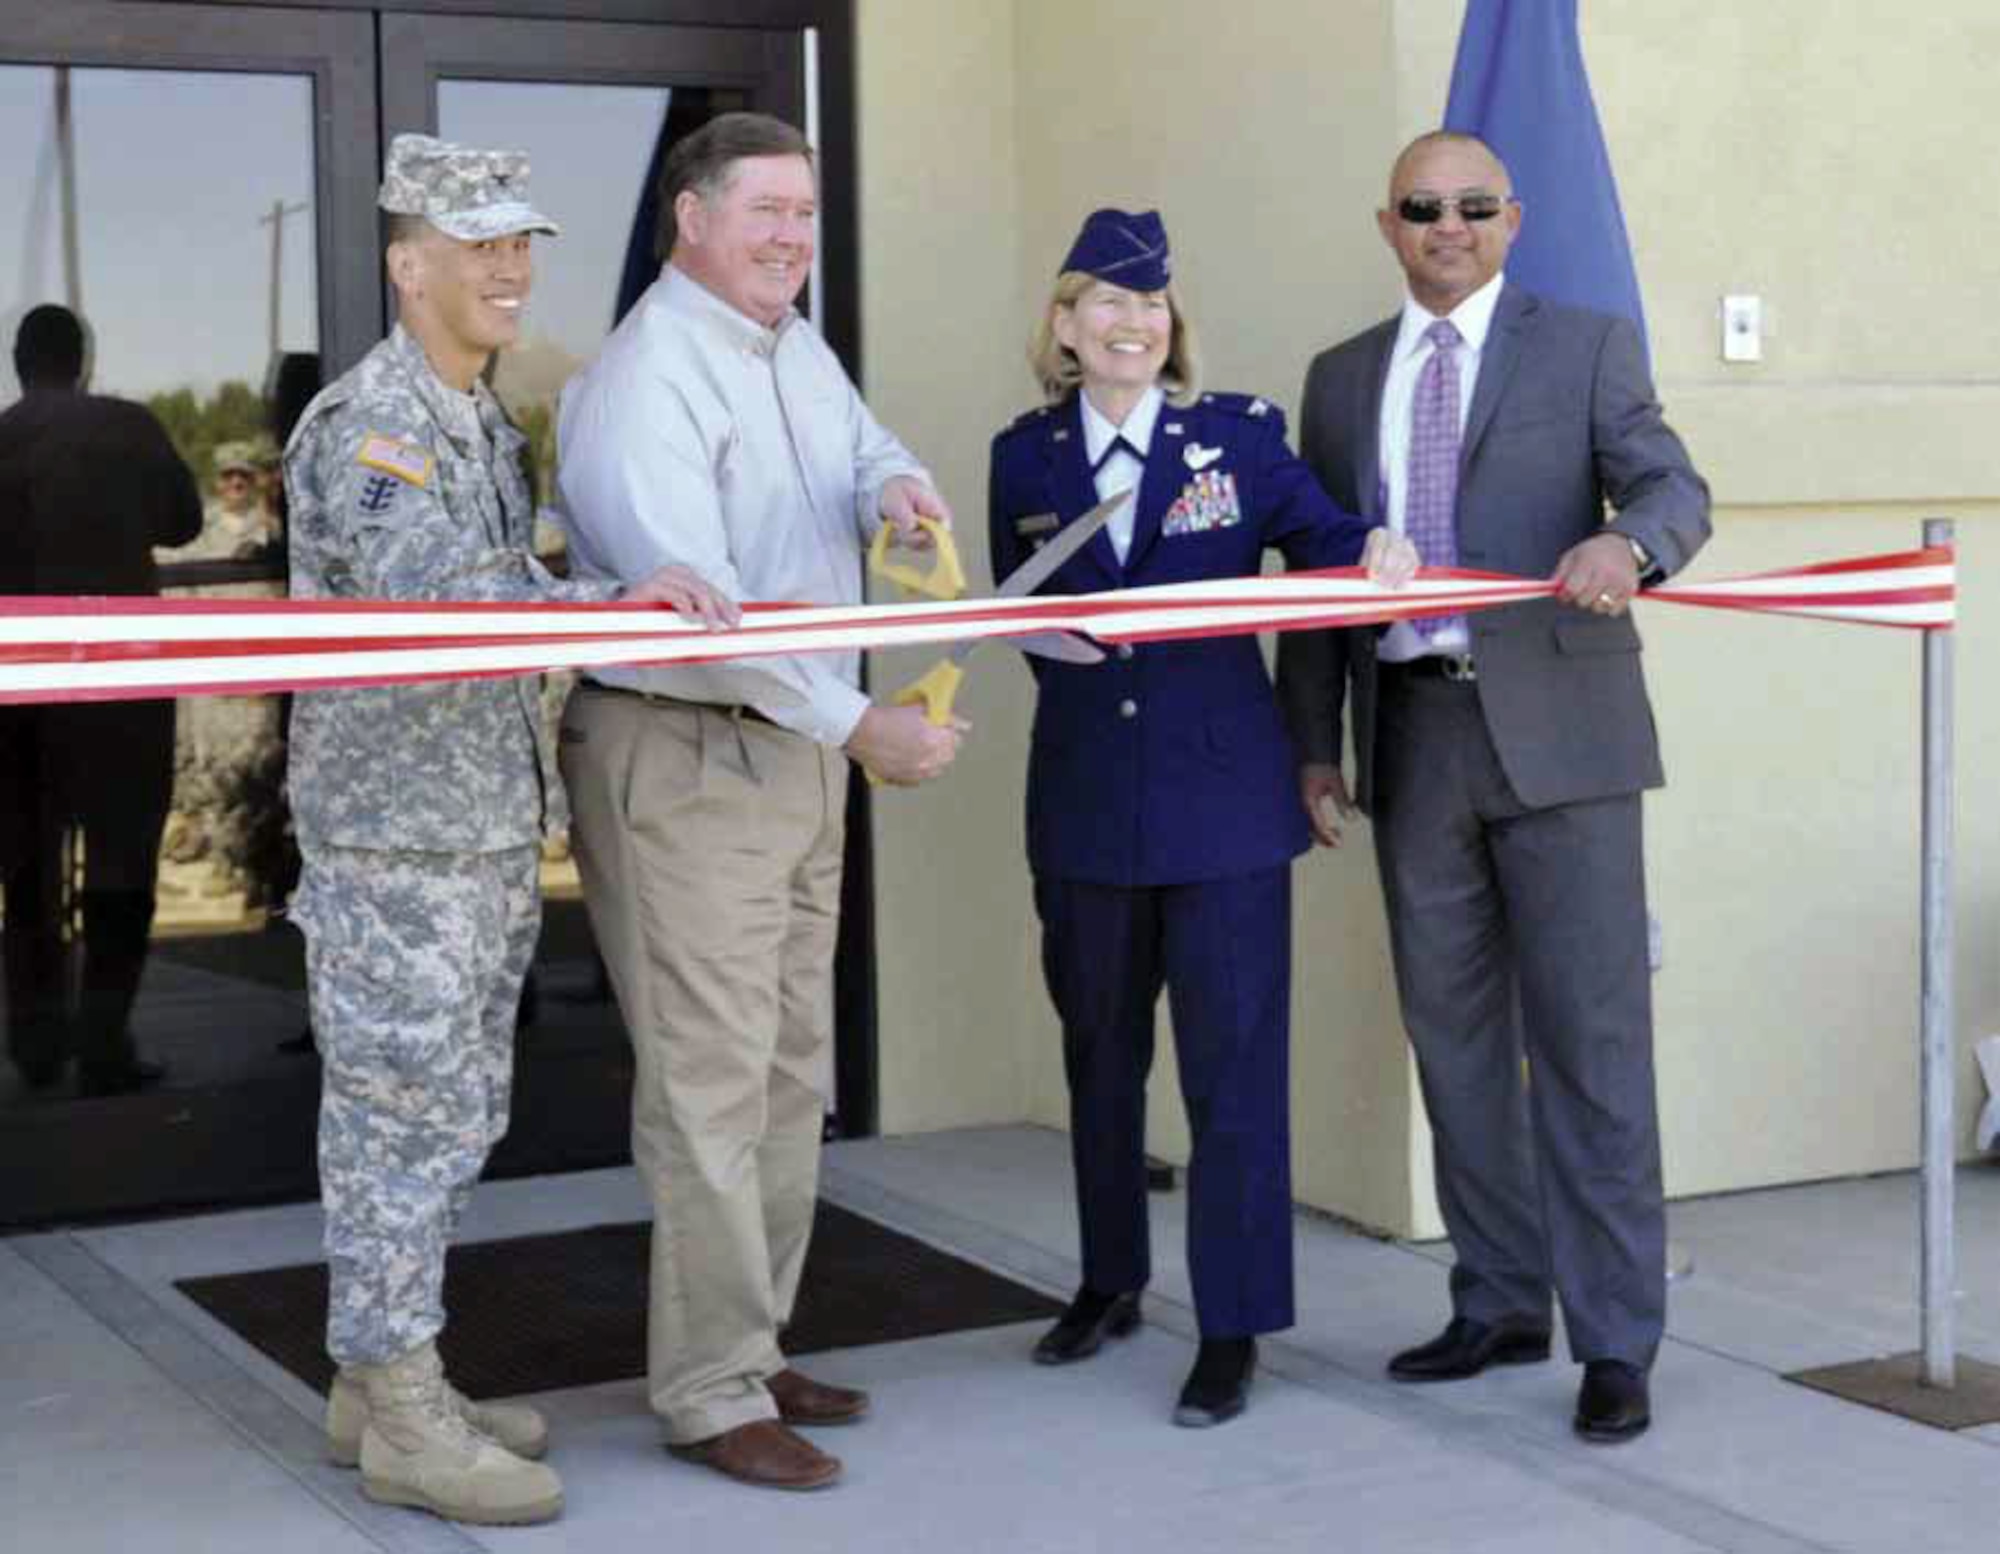 Col. Mark Toy, commander Los Angeles District, U.S. Army Corps of Engineers; Congressman Ken Calvert, 44th Congressional District; Col. Mary Aldrian, commander, 452d Air Mobility Wing and Hector Sanchez, president, P and S Construction, Inc., cut the ribbon to officially open the new Indoor Small Arms Training Range on March Air Reserve Base, Calif., March 10, 2012. The 28,000 square foot facility will have the capability to provide shooters both daytime and nighttime firing options and will be open for business sometime in April. (U.S. Air Force photo TSgt Joe Davidson)